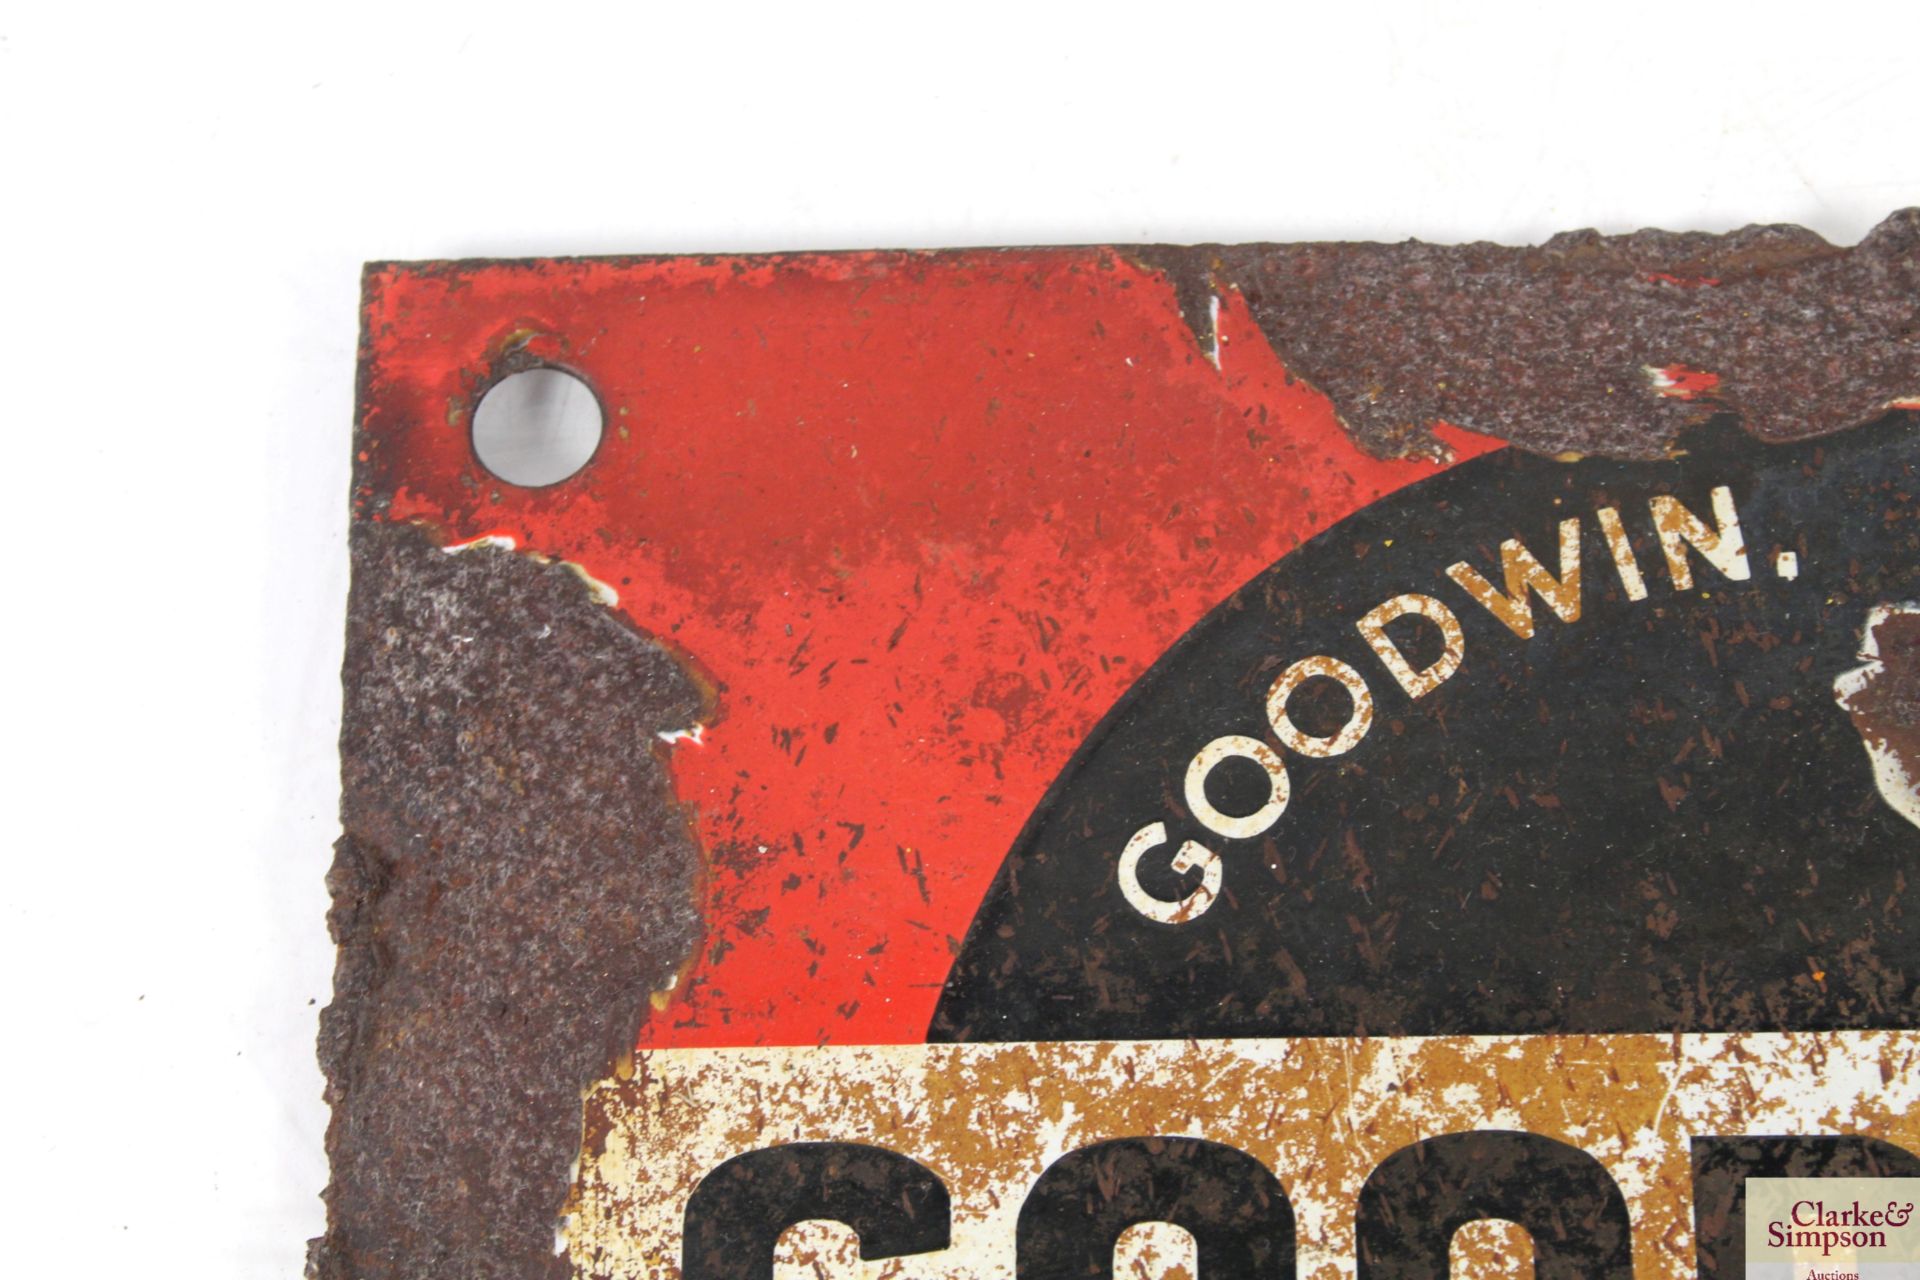 A "Good-Win" enamel sign, approx. 12" x 9" - Image 2 of 10